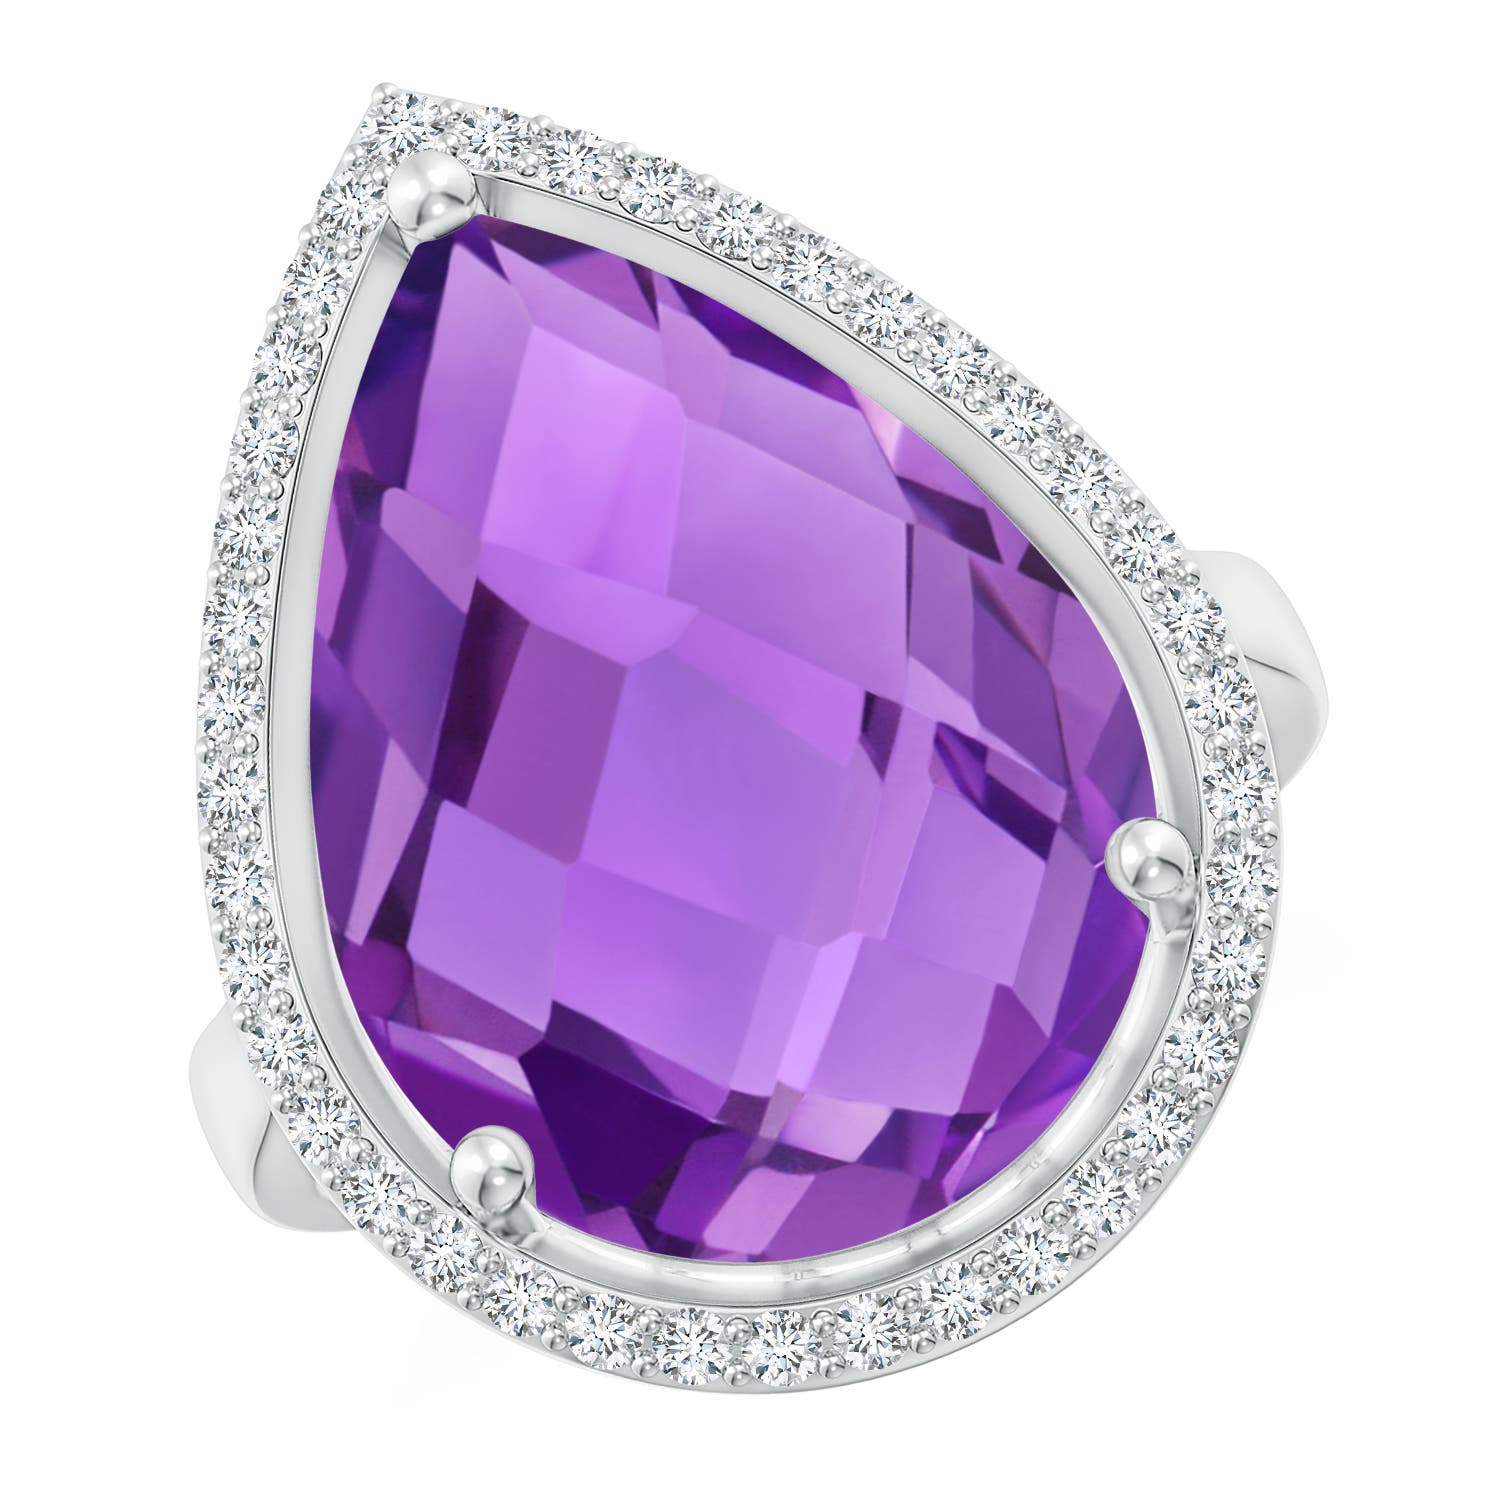 AAA - Amethyst / 10.57 CT / 14 KT White Gold